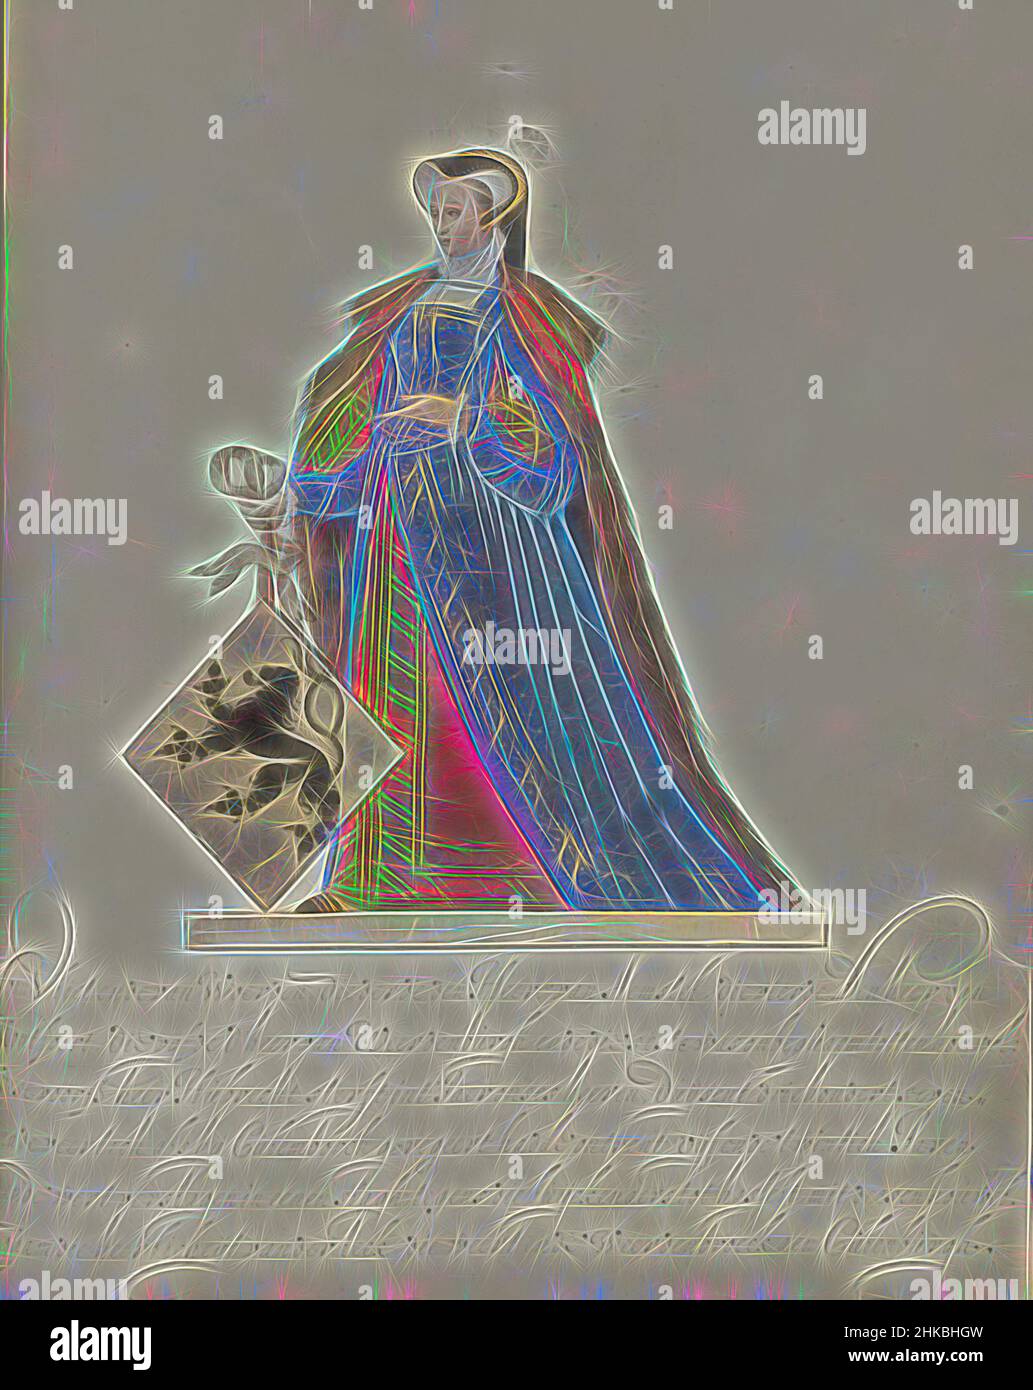 Inspired by Jutta van der Leck, lady of Culemborg, Jutta van der Leck, lady of Culemborg. Wife of Hubrecht IV, lord of Culemborg. Standing full-length with the coat of arms of the Van der Leck family. Part of an illustrated manuscript containing the genealogy of the lords and counts of Culemborg, Reimagined by Artotop. Classic art reinvented with a modern twist. Design of warm cheerful glowing of brightness and light ray radiance. Photography inspired by surrealism and futurism, embracing dynamic energy of modern technology, movement, speed and revolutionize culture Stock Photo